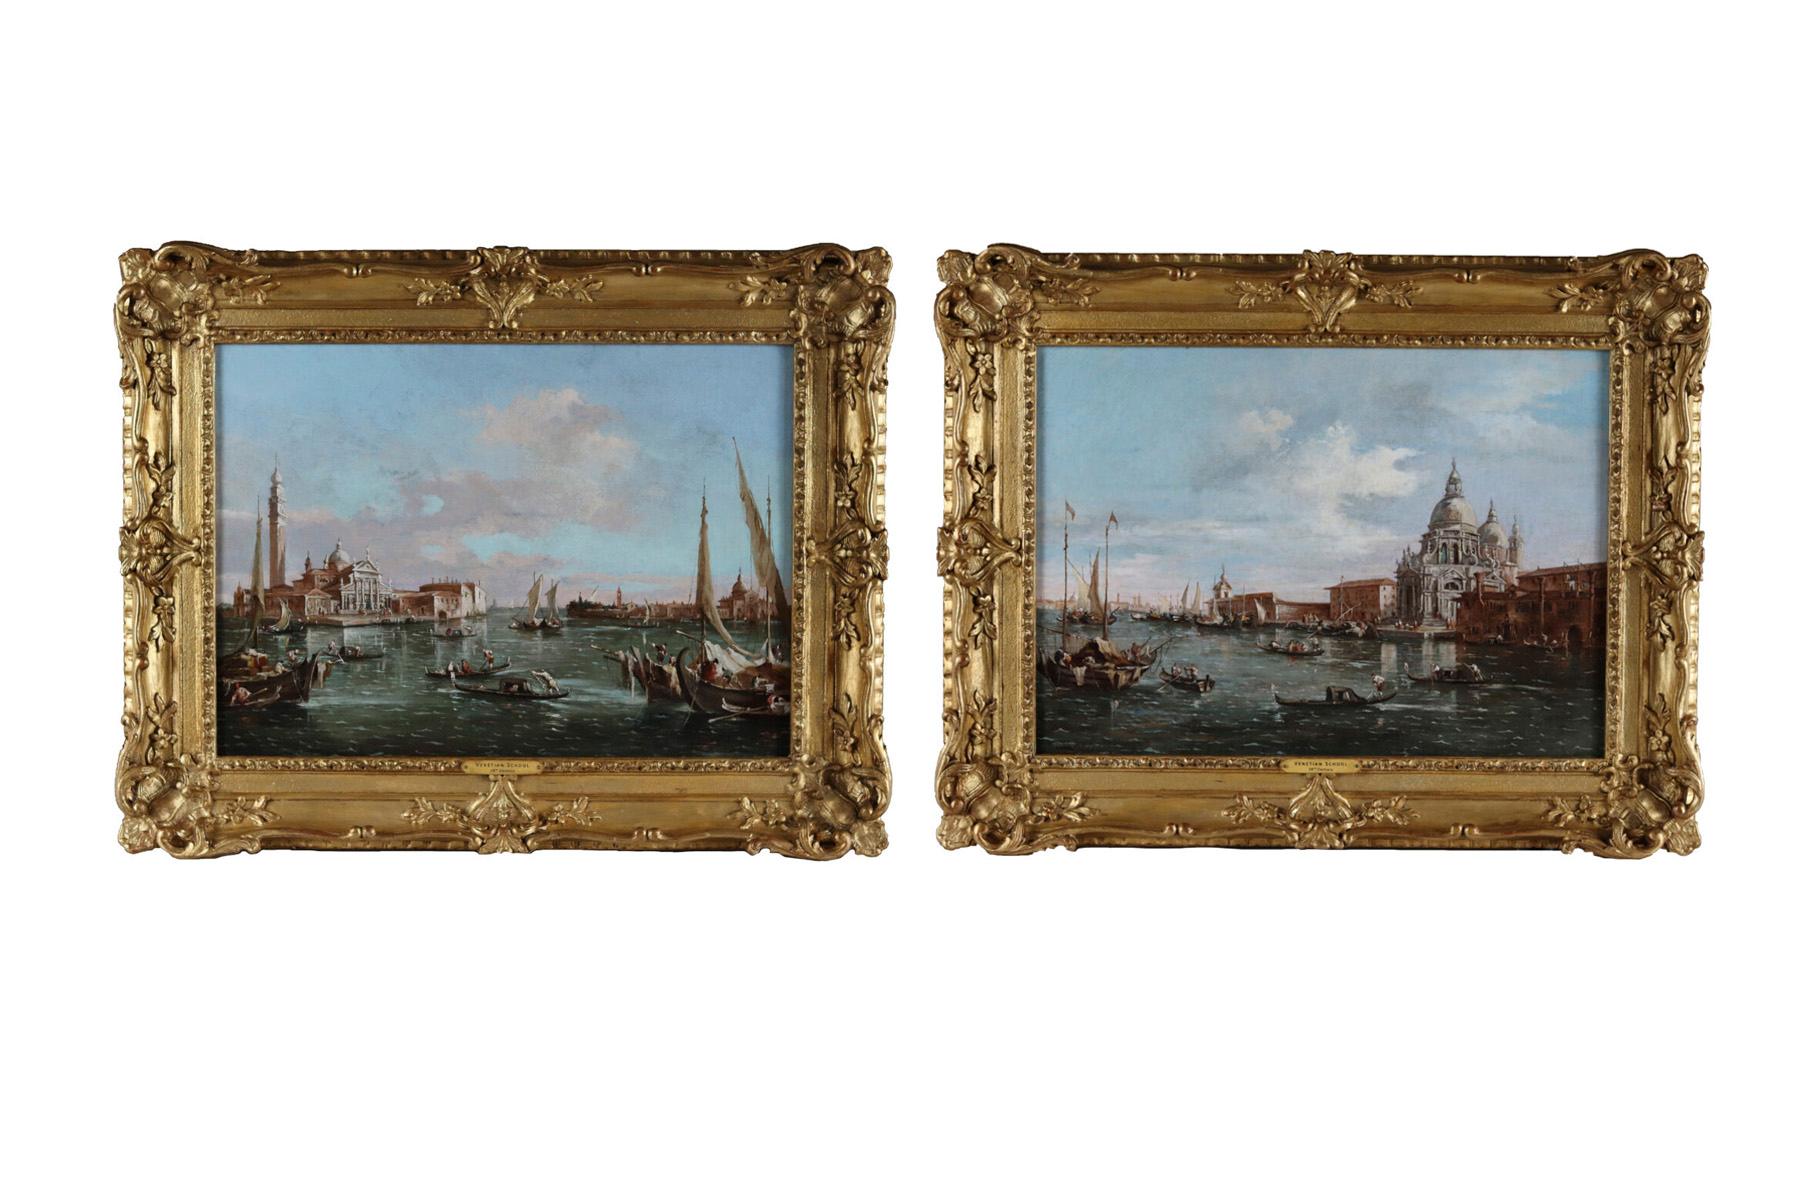 A Pair of 18th century Venetian Canal Scenes in the Style of Francesco Guardi   For Sale 8